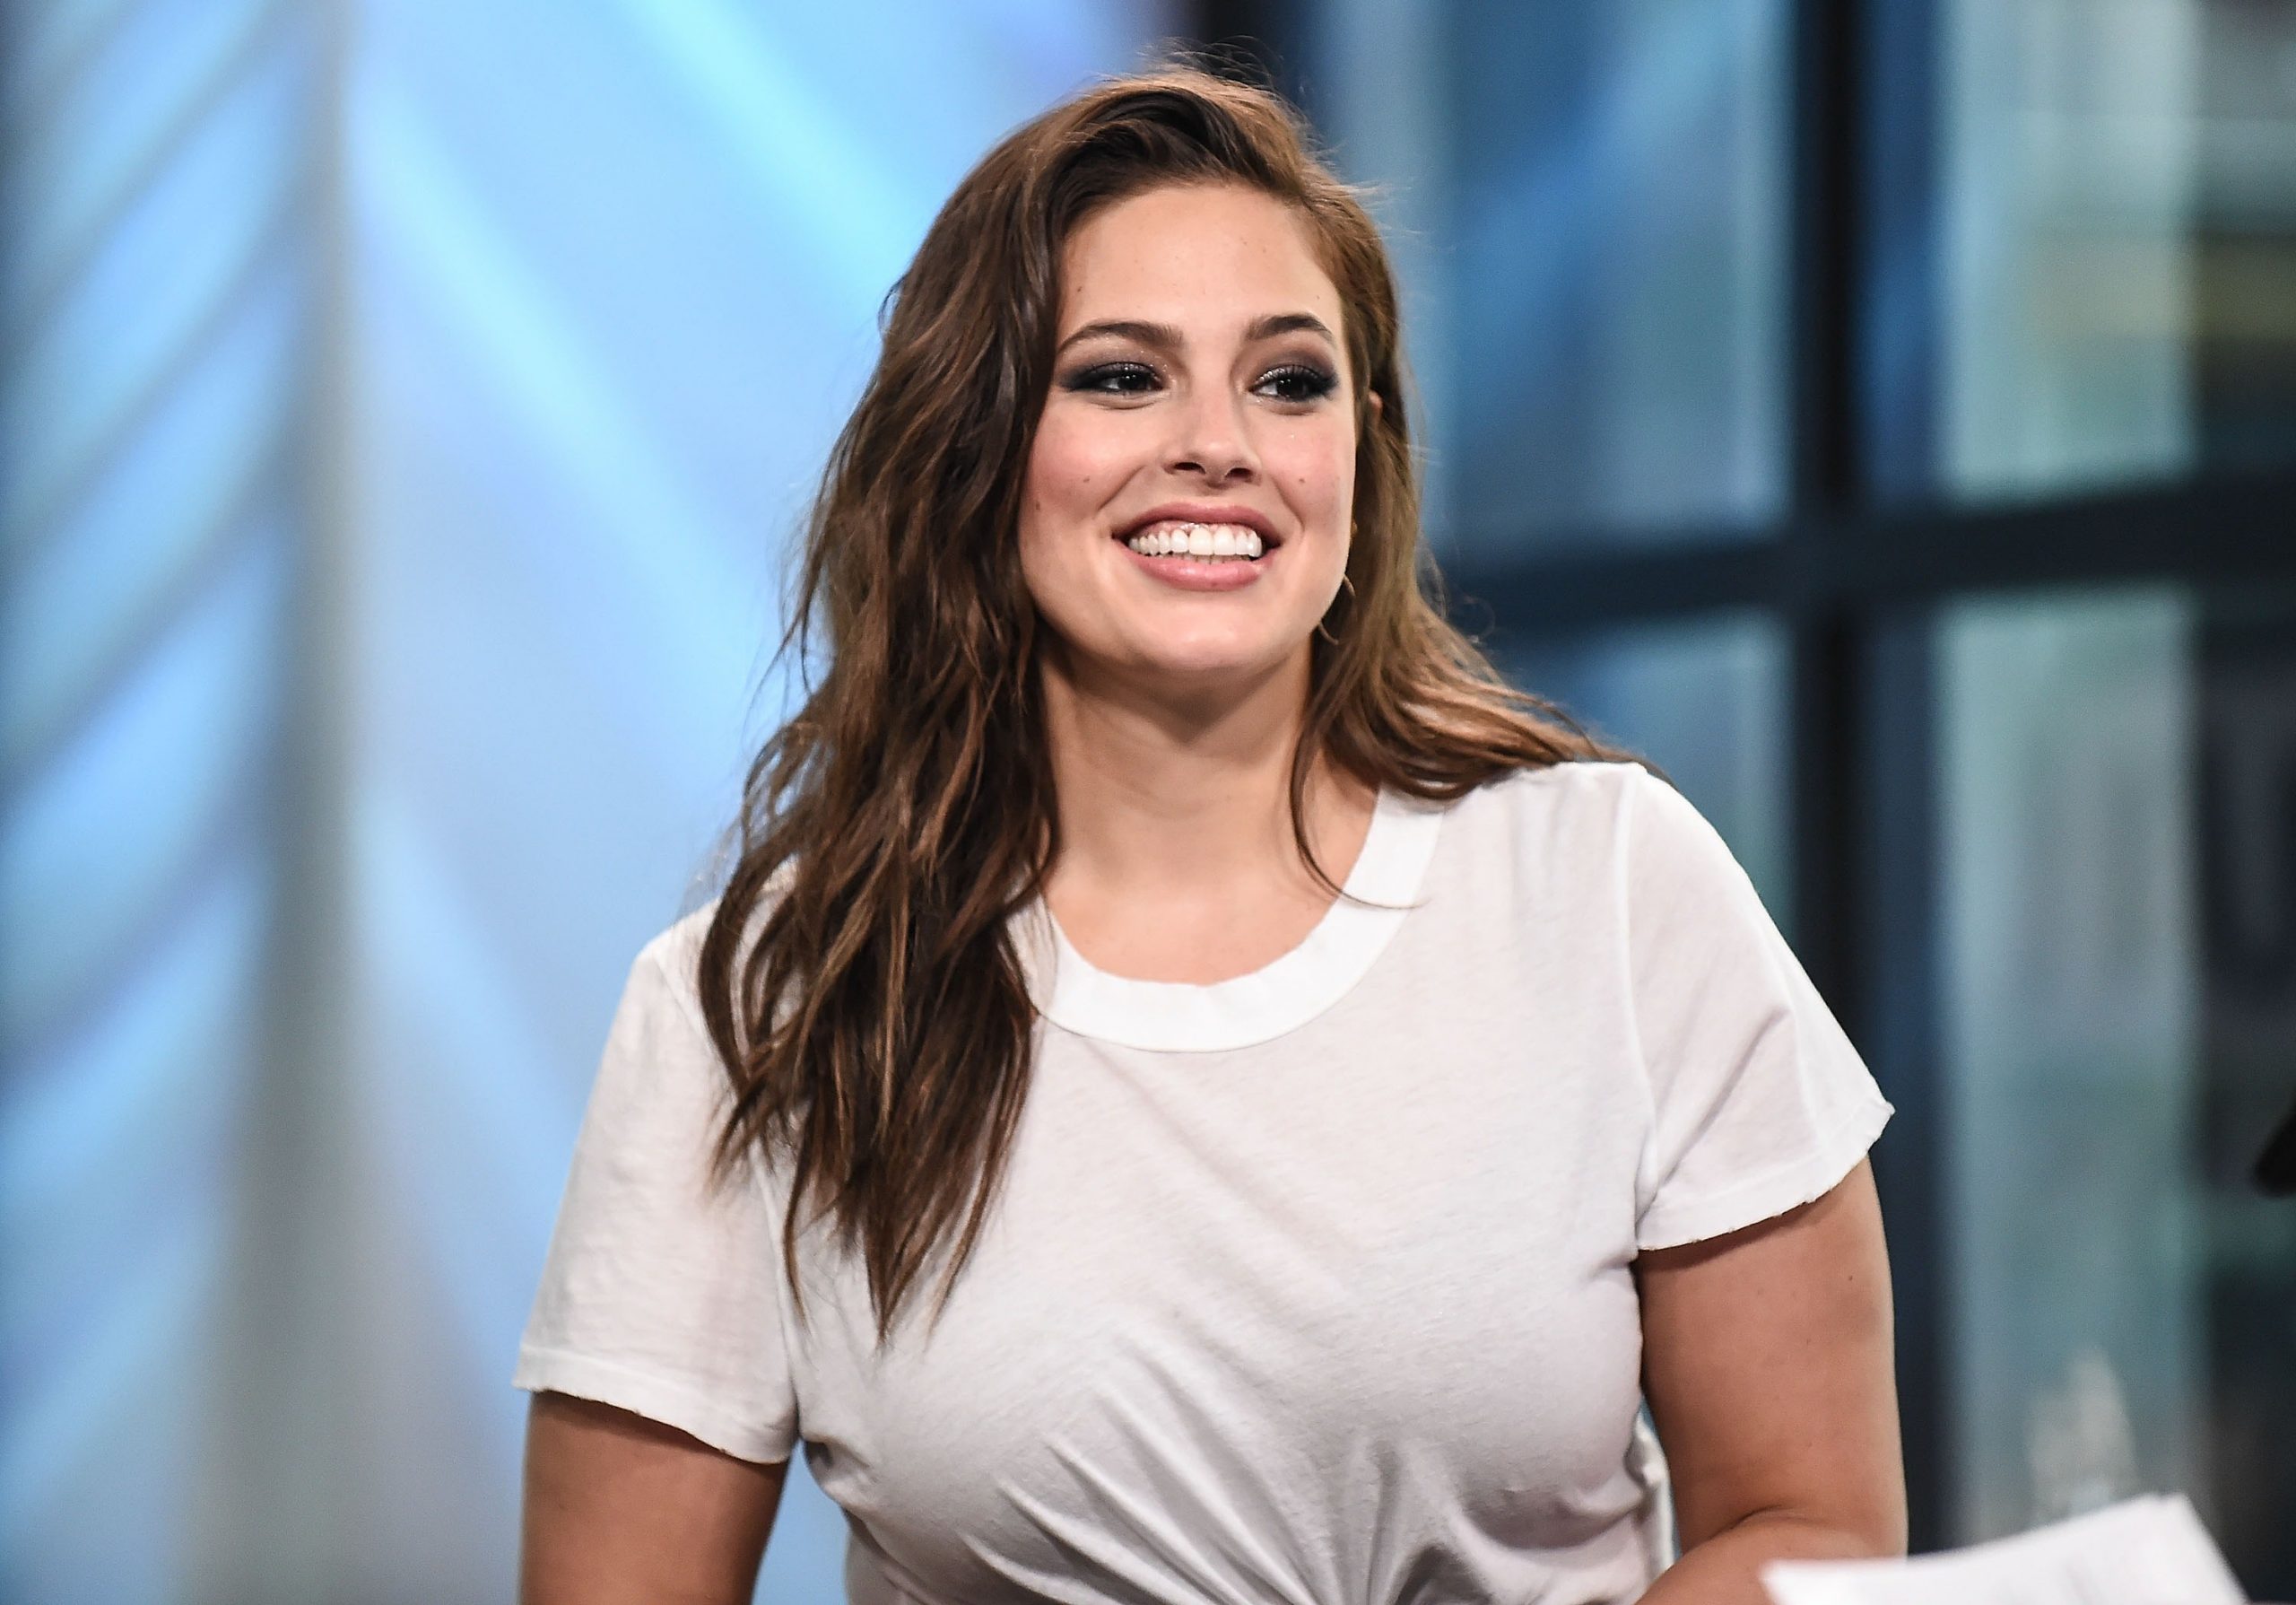 is ashley graham pregnant with twins